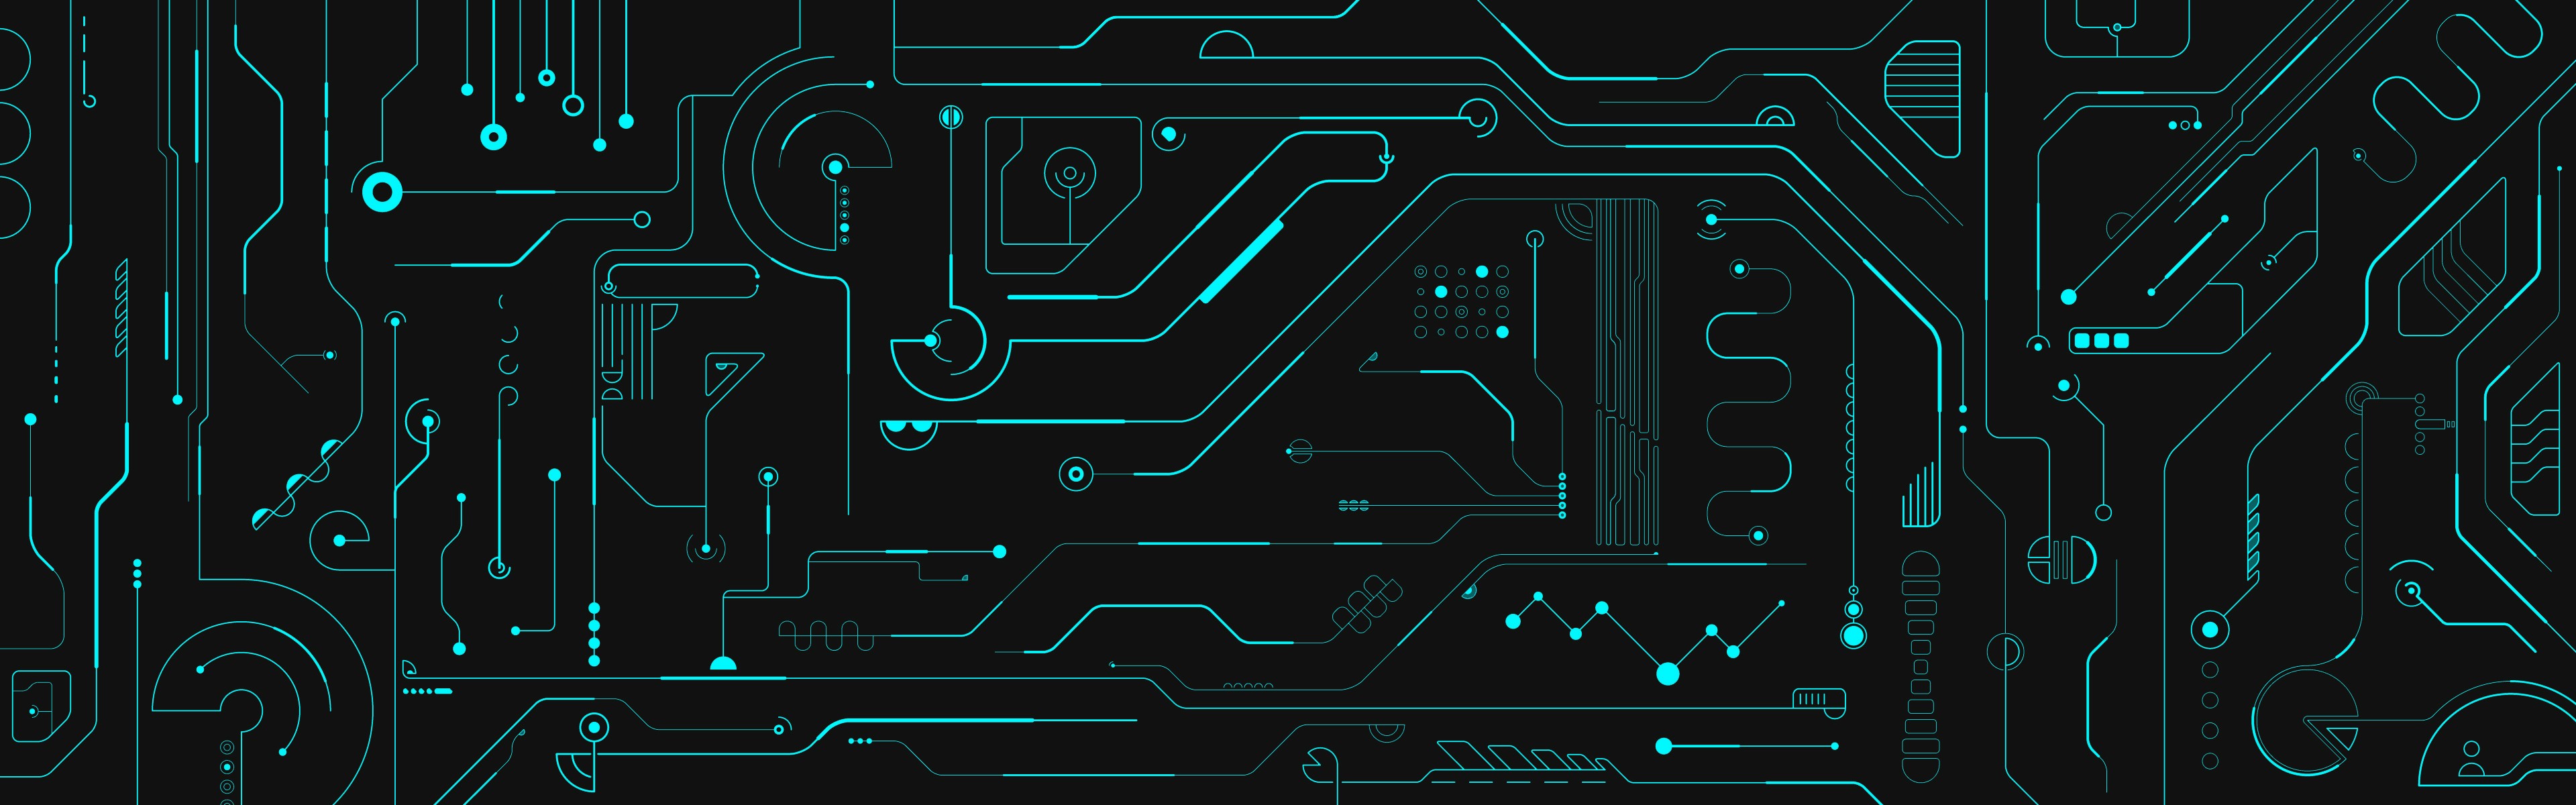 Technology Circuit HD Wallpaper | Background Image